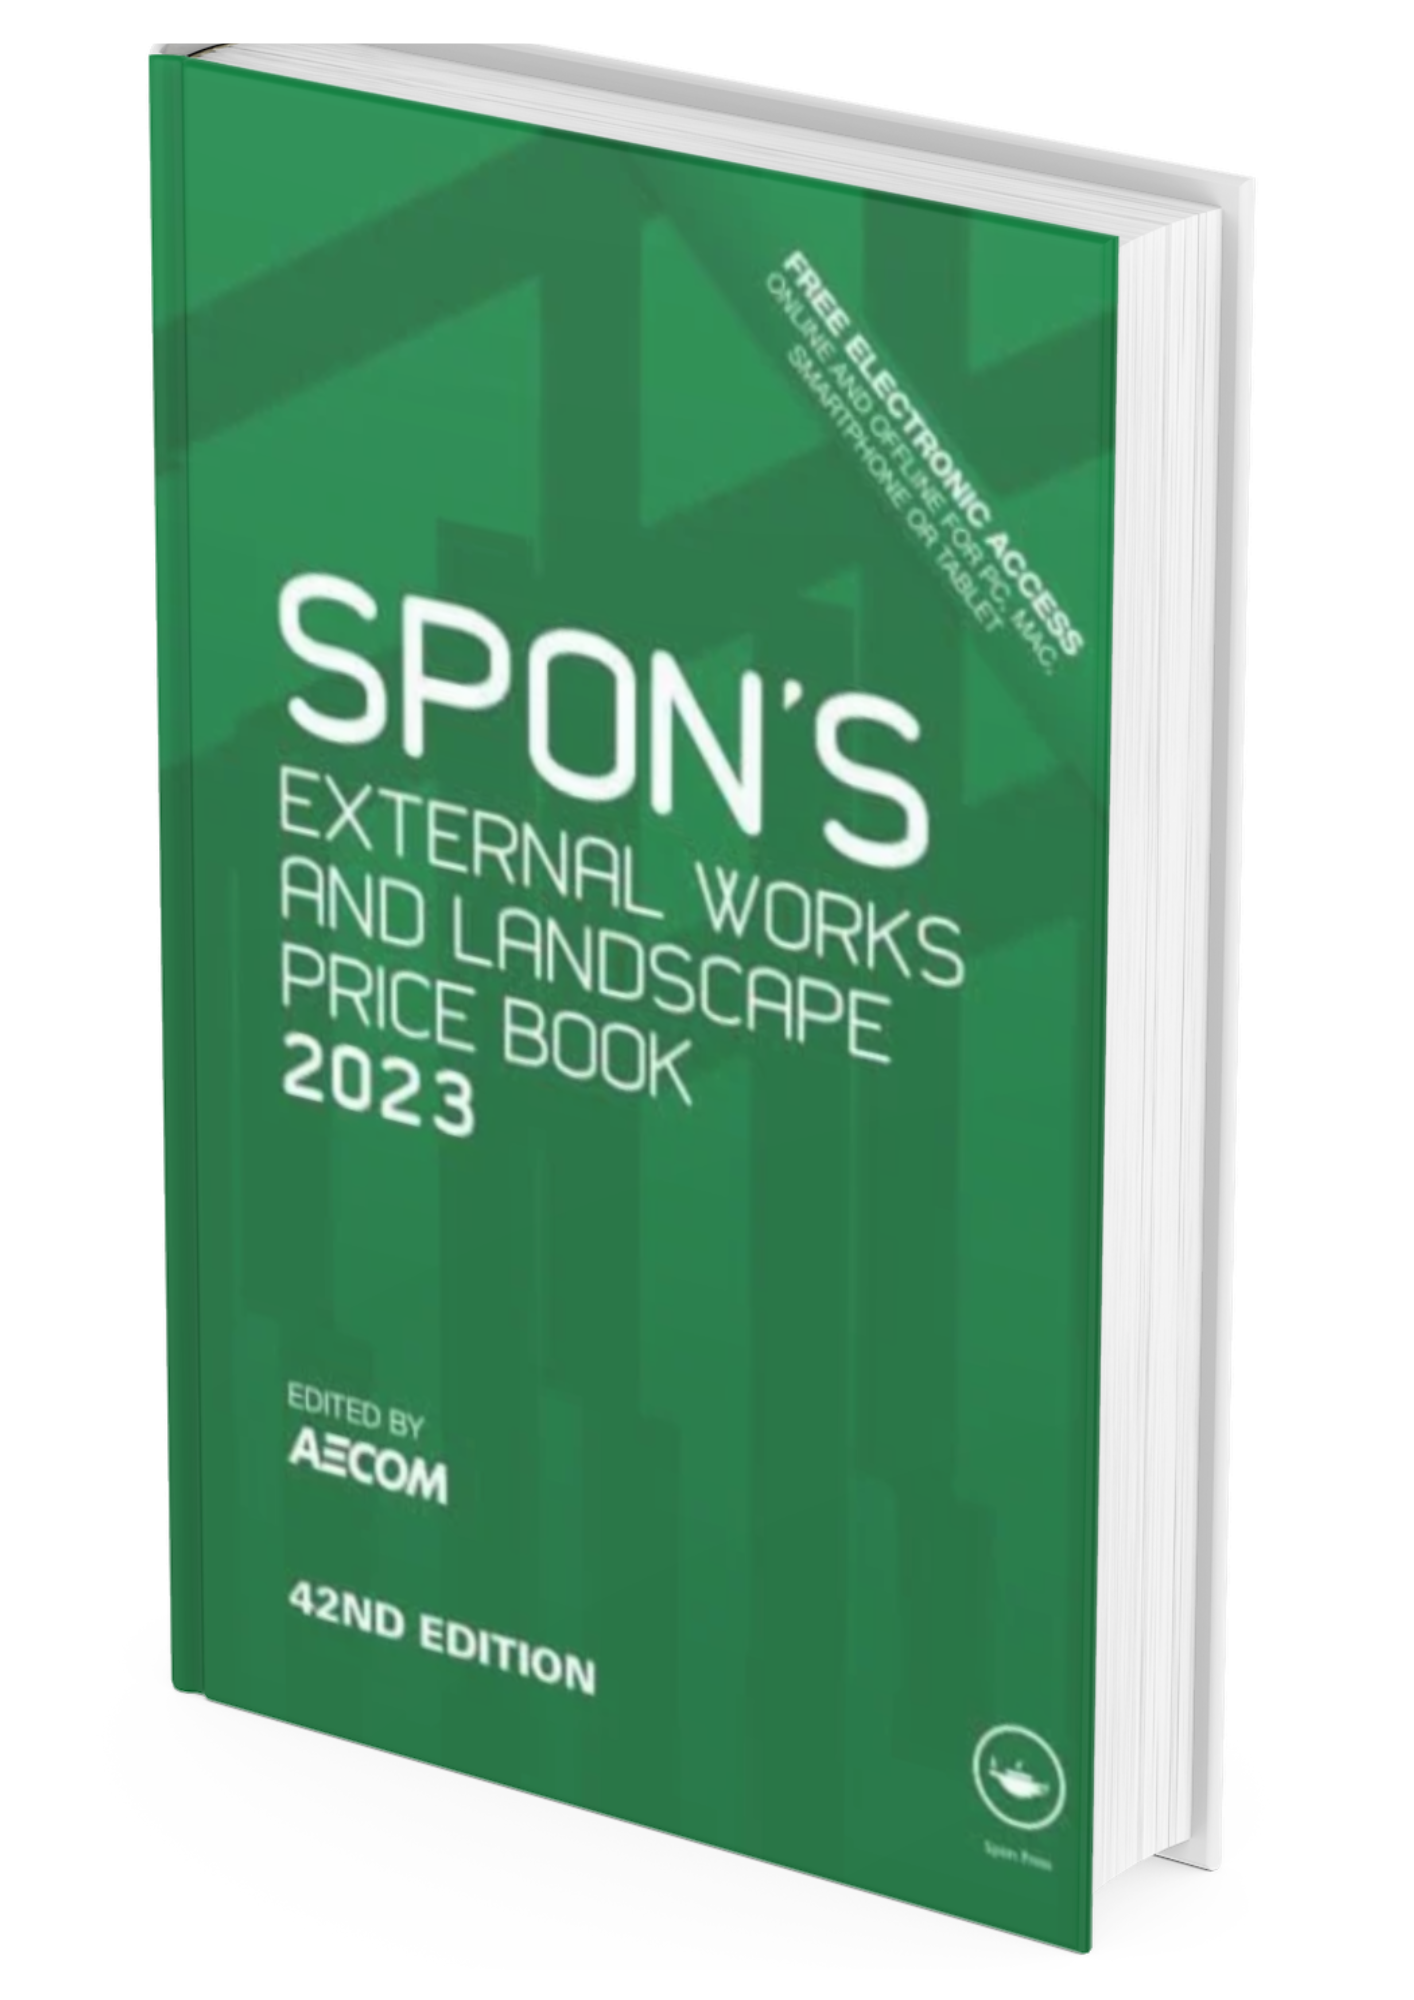 SPONS External Works and Landscape Price Book